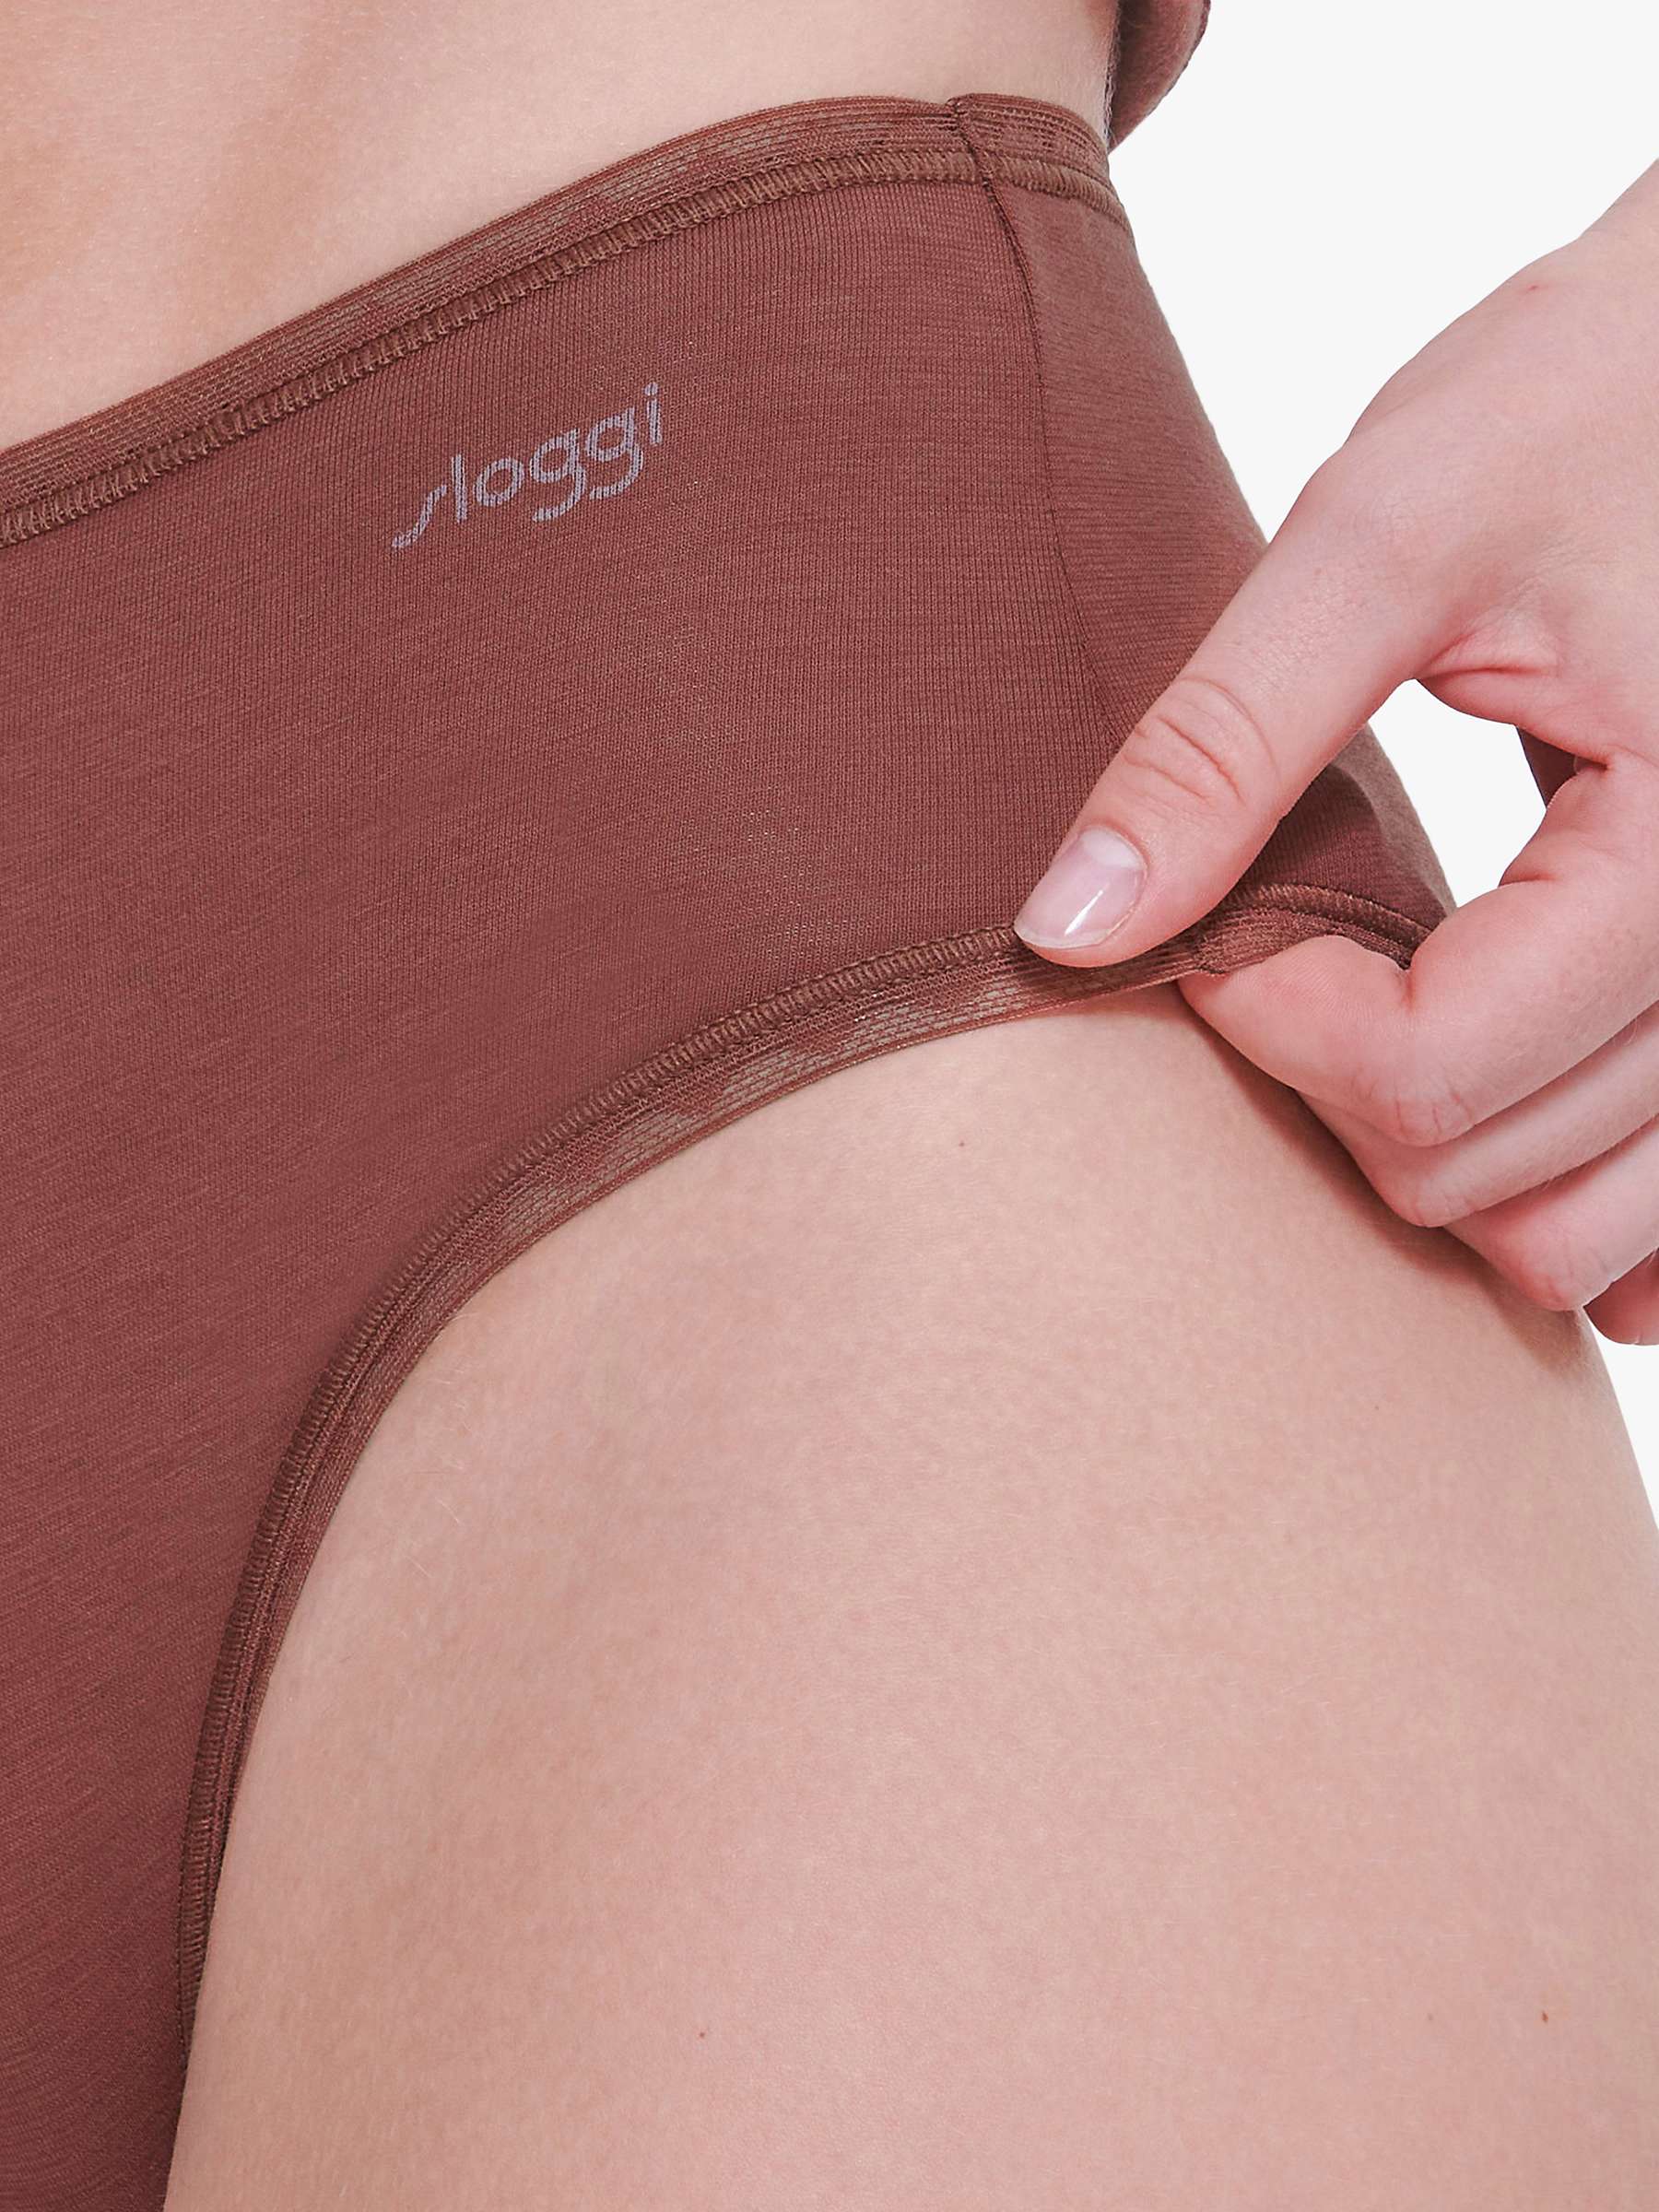 Buy sloggi GO High Waist Knickers, Pack of 2 Online at johnlewis.com